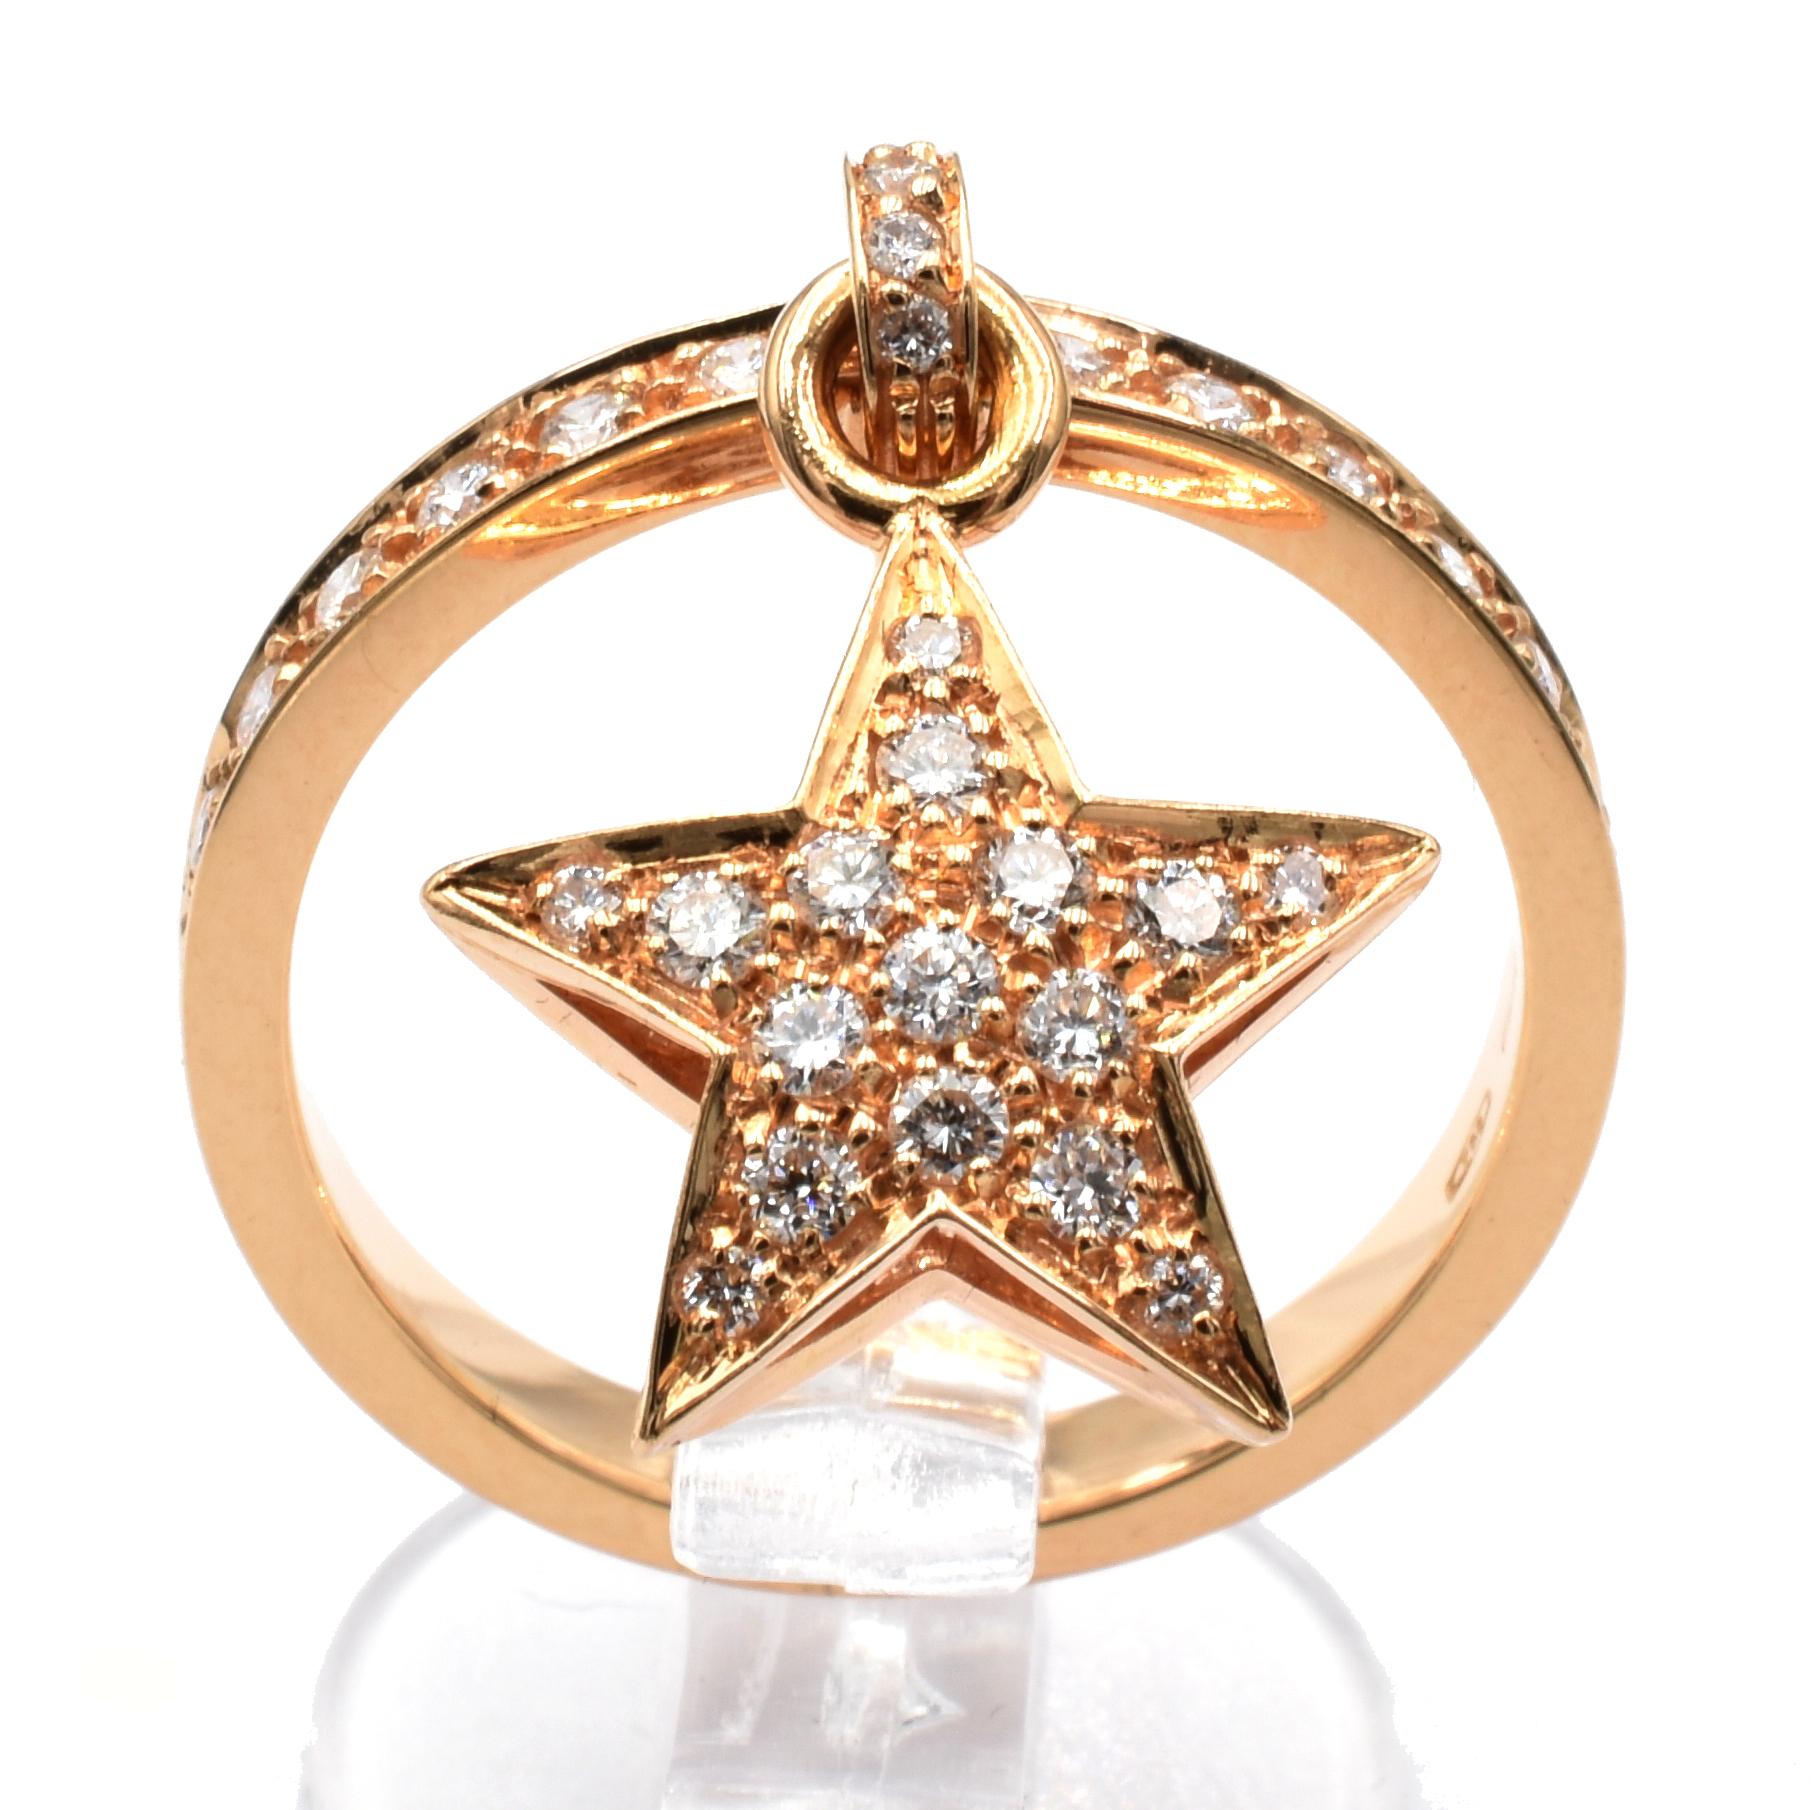 18 Kt Rose Gold Ring with Pendant Star Charm. This Charm is set in both sides with White Diamonds and hangs freely on the ring.
A very Funny and Happy Ring that perfectly match with a wedding ring for an everyday use.
Handmade in Italy in or Atelier